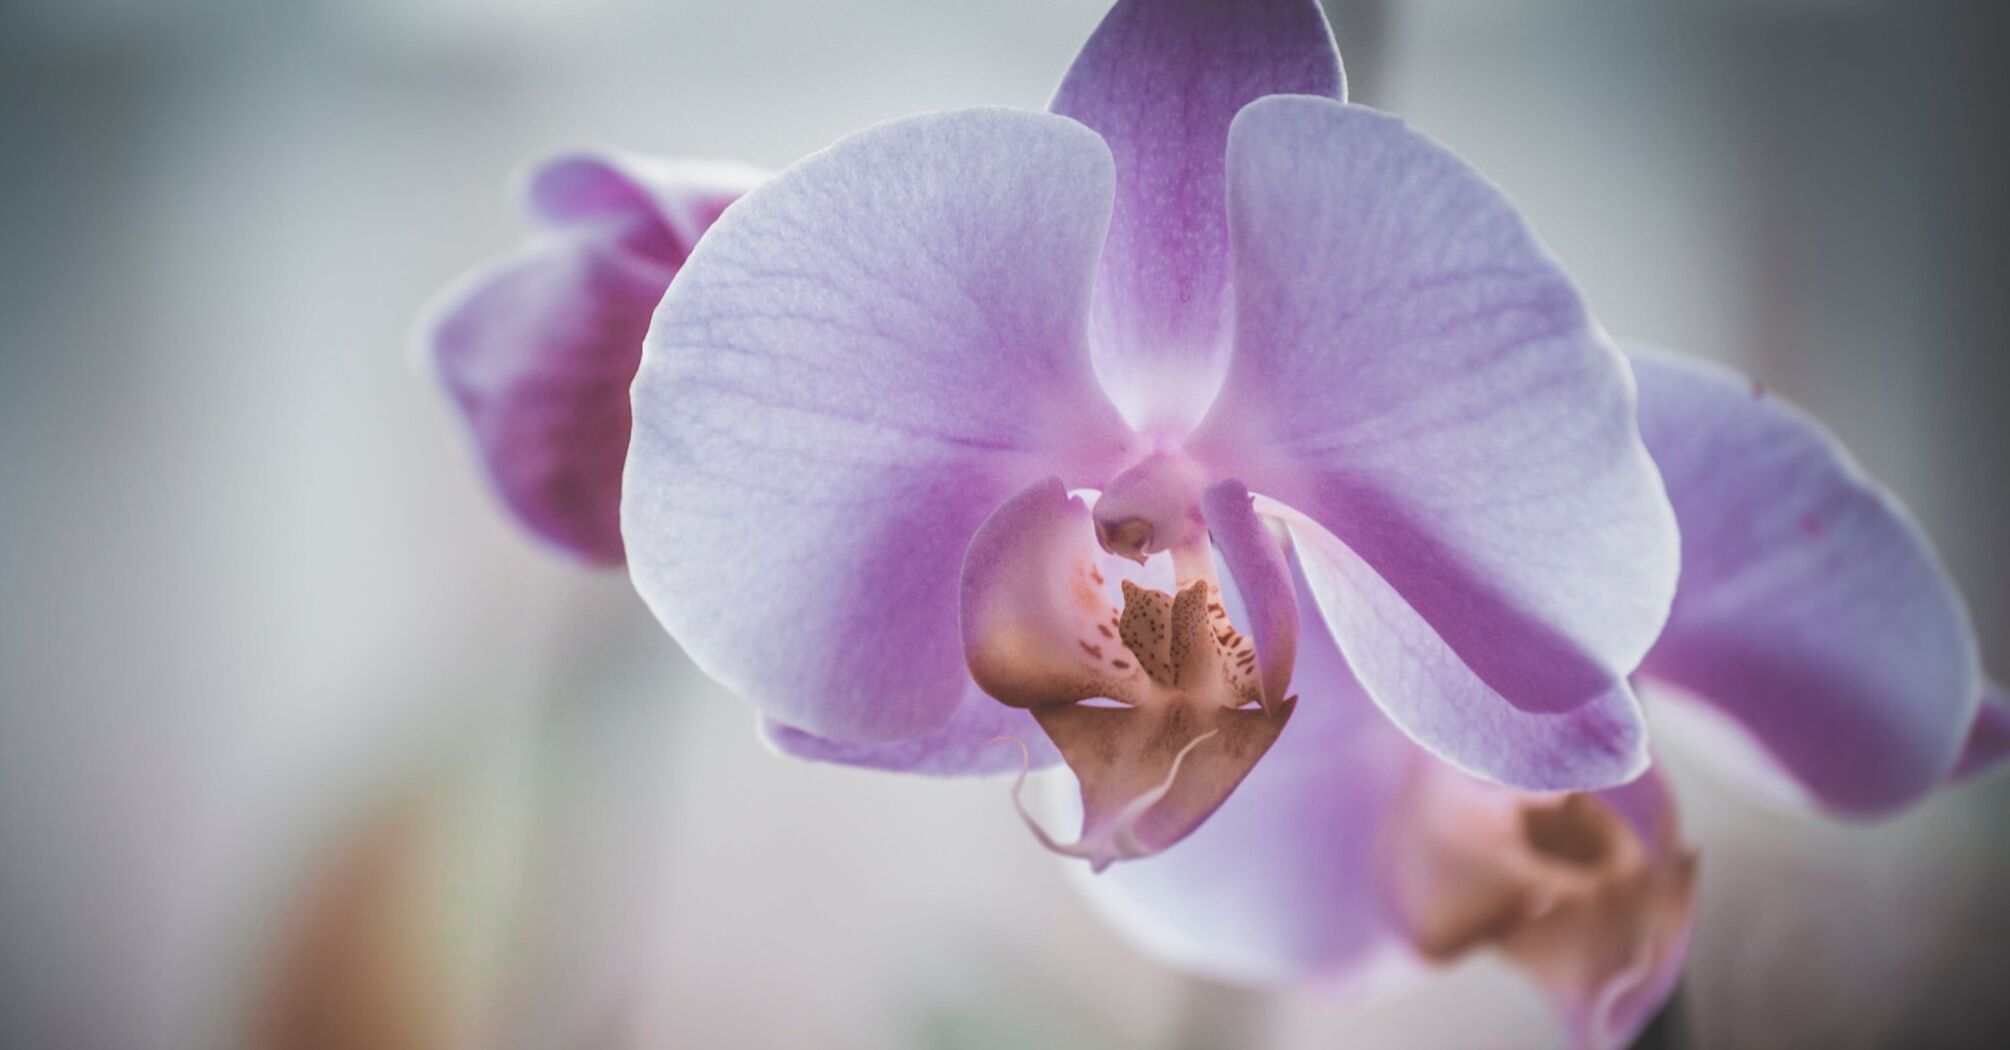 How to grow beautiful orchids at home: secrets from gardeners